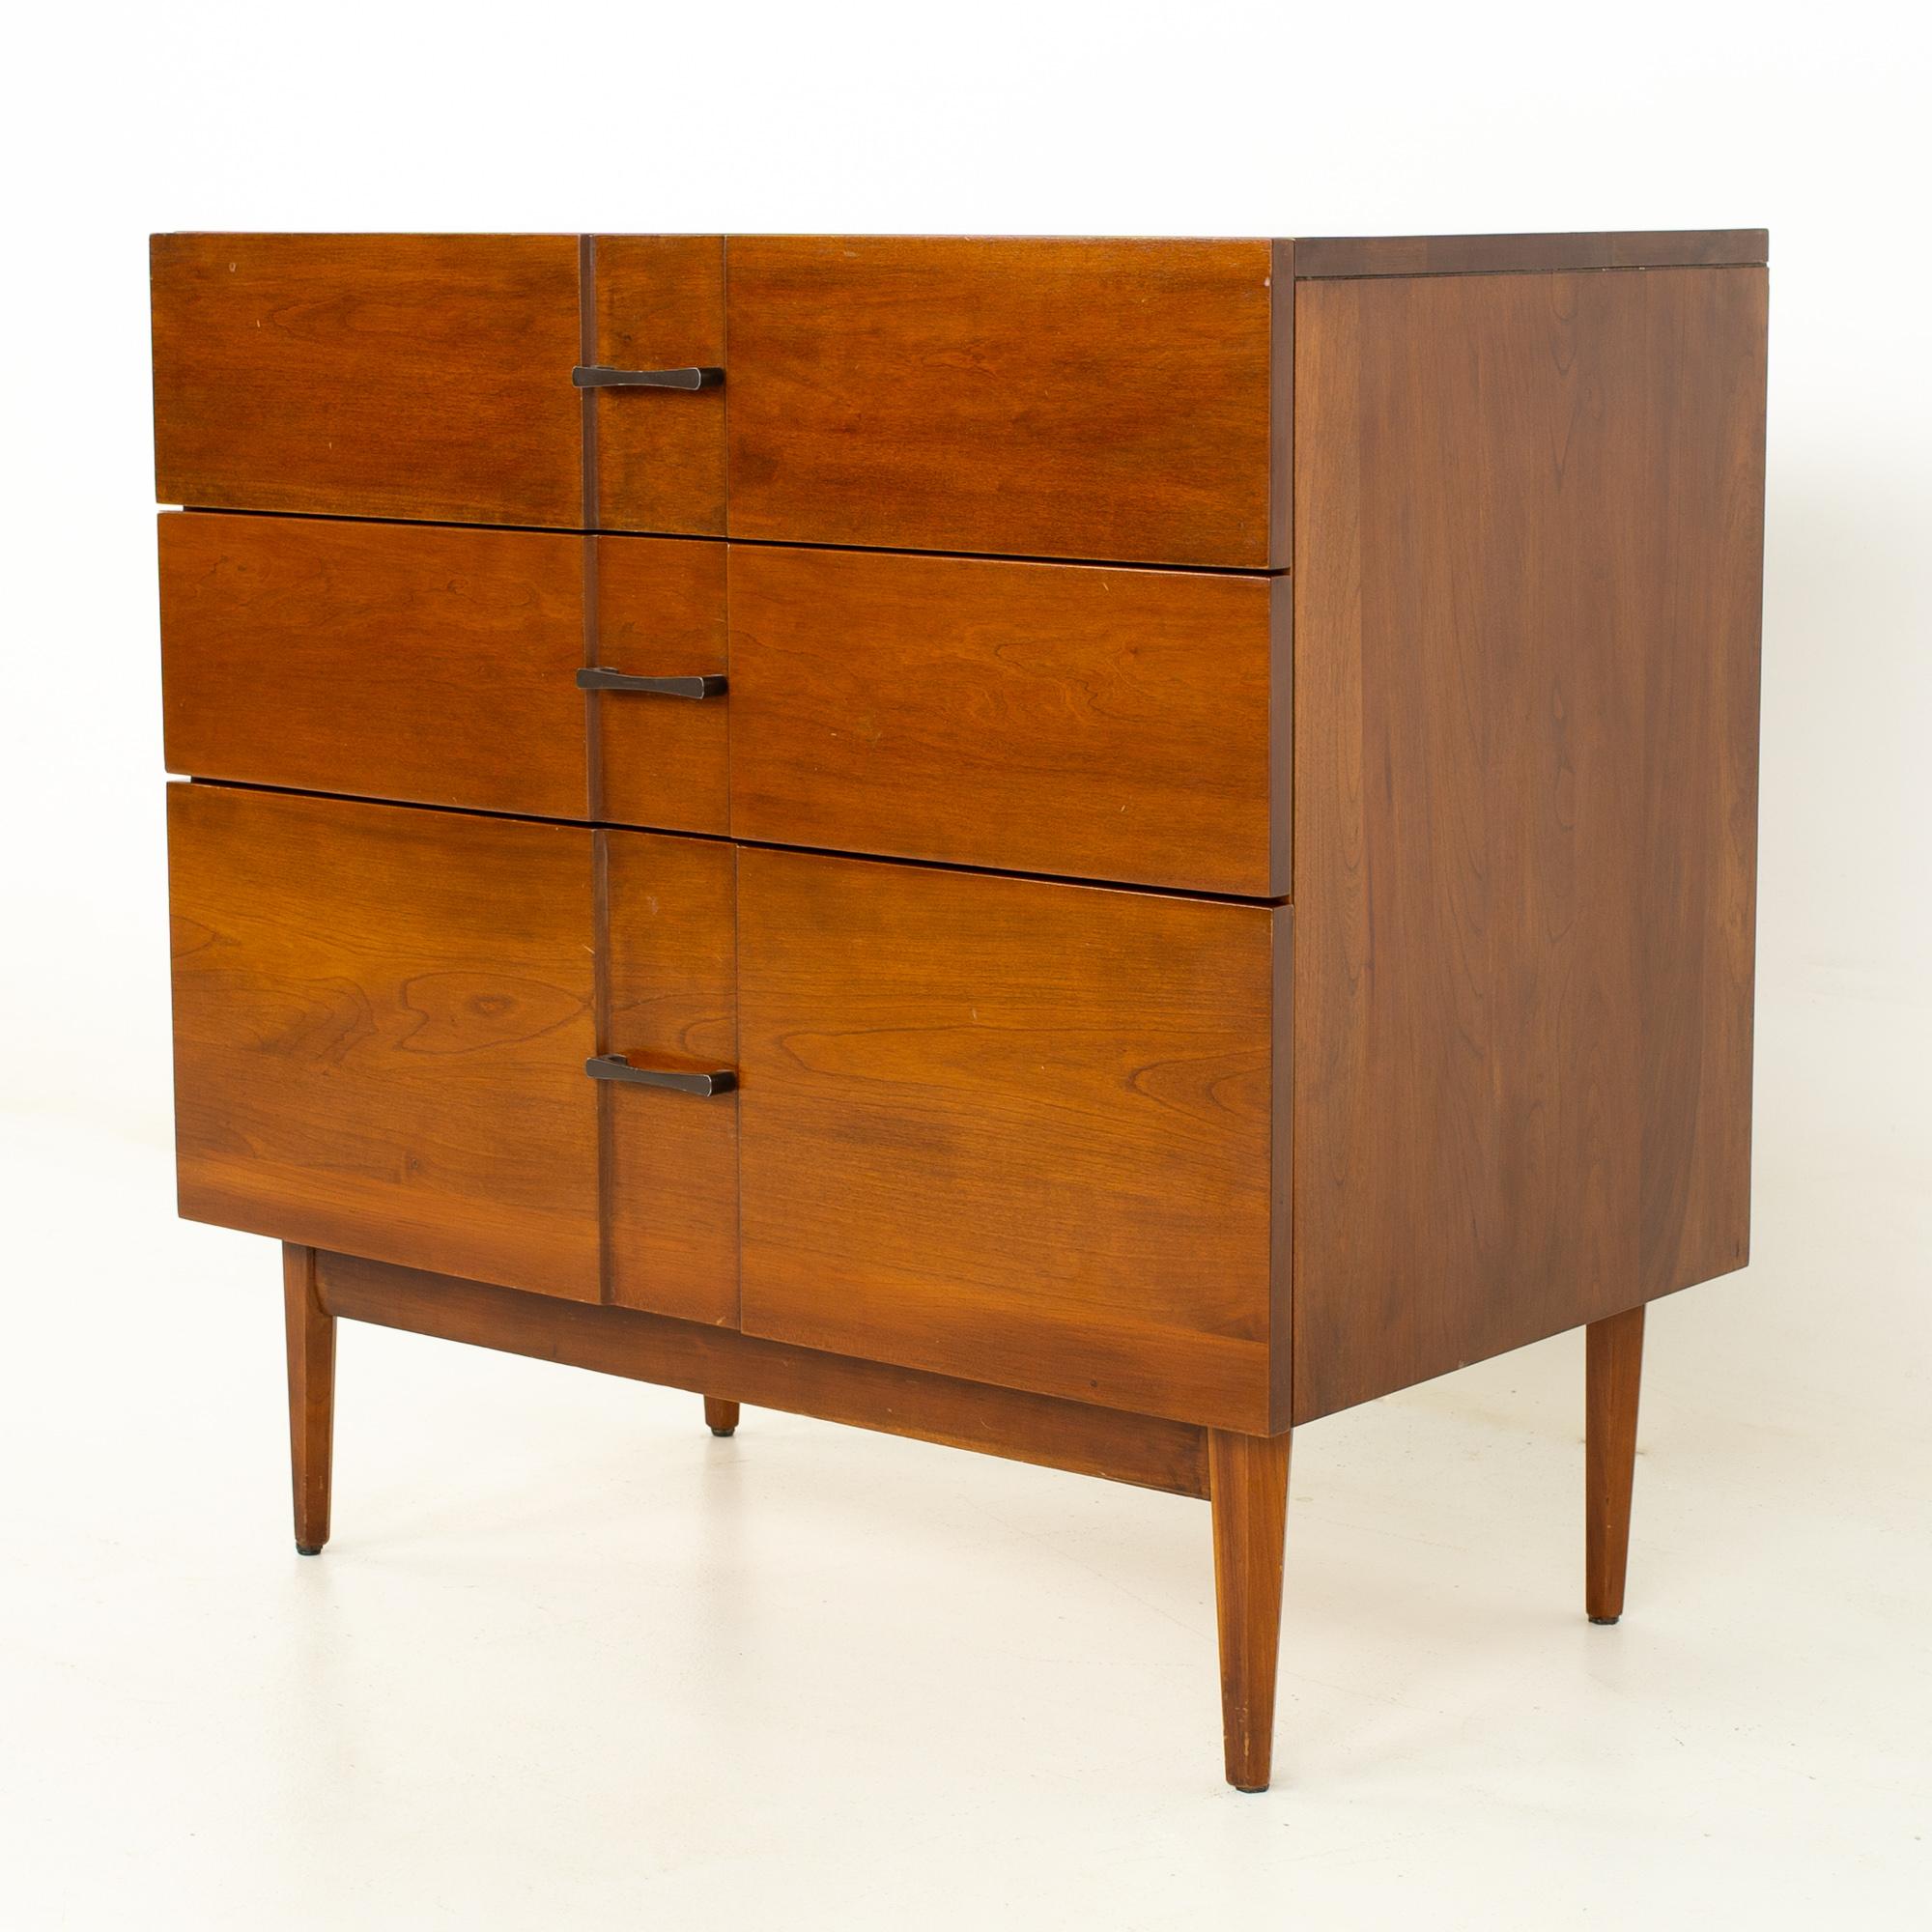 Kipp Stewart for American Design Foundation Group mid century 3 drawer dresser chest
This dresser measures: 30 wide x 18 deep x 30 inches high

All pieces of furniture can be had in what we call restored vintage condition. That means the piece is